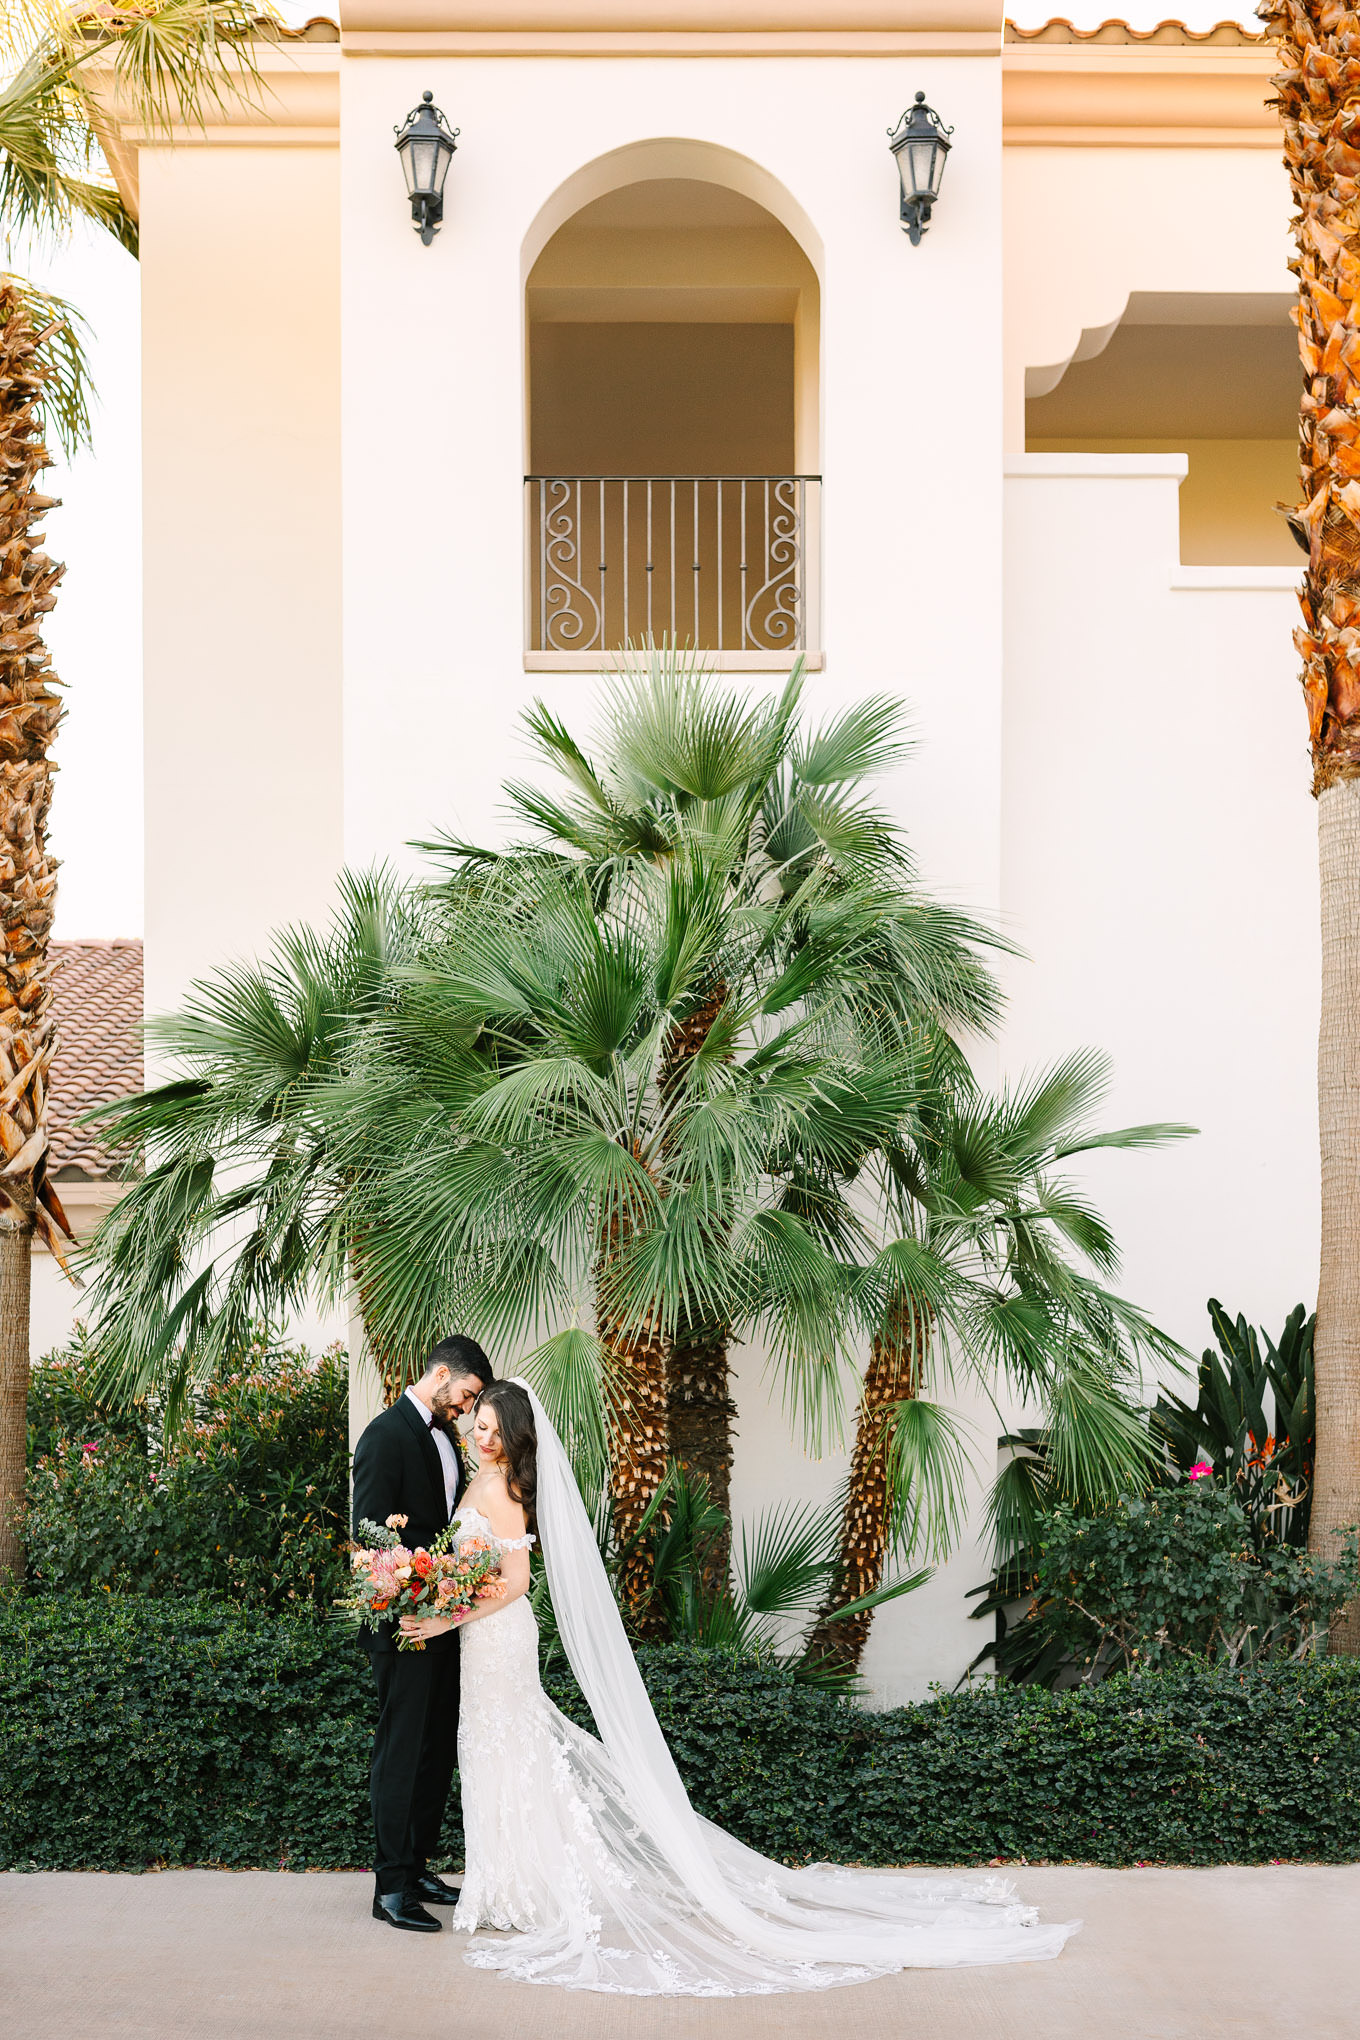 La Quinta Country Club Wedding | Wedding and elopement photography roundup | Los Angeles and Palm Springs photographer | #losangeleswedding #palmspringswedding #elopementphotographer Source: Mary Costa Photography | Los Angeles